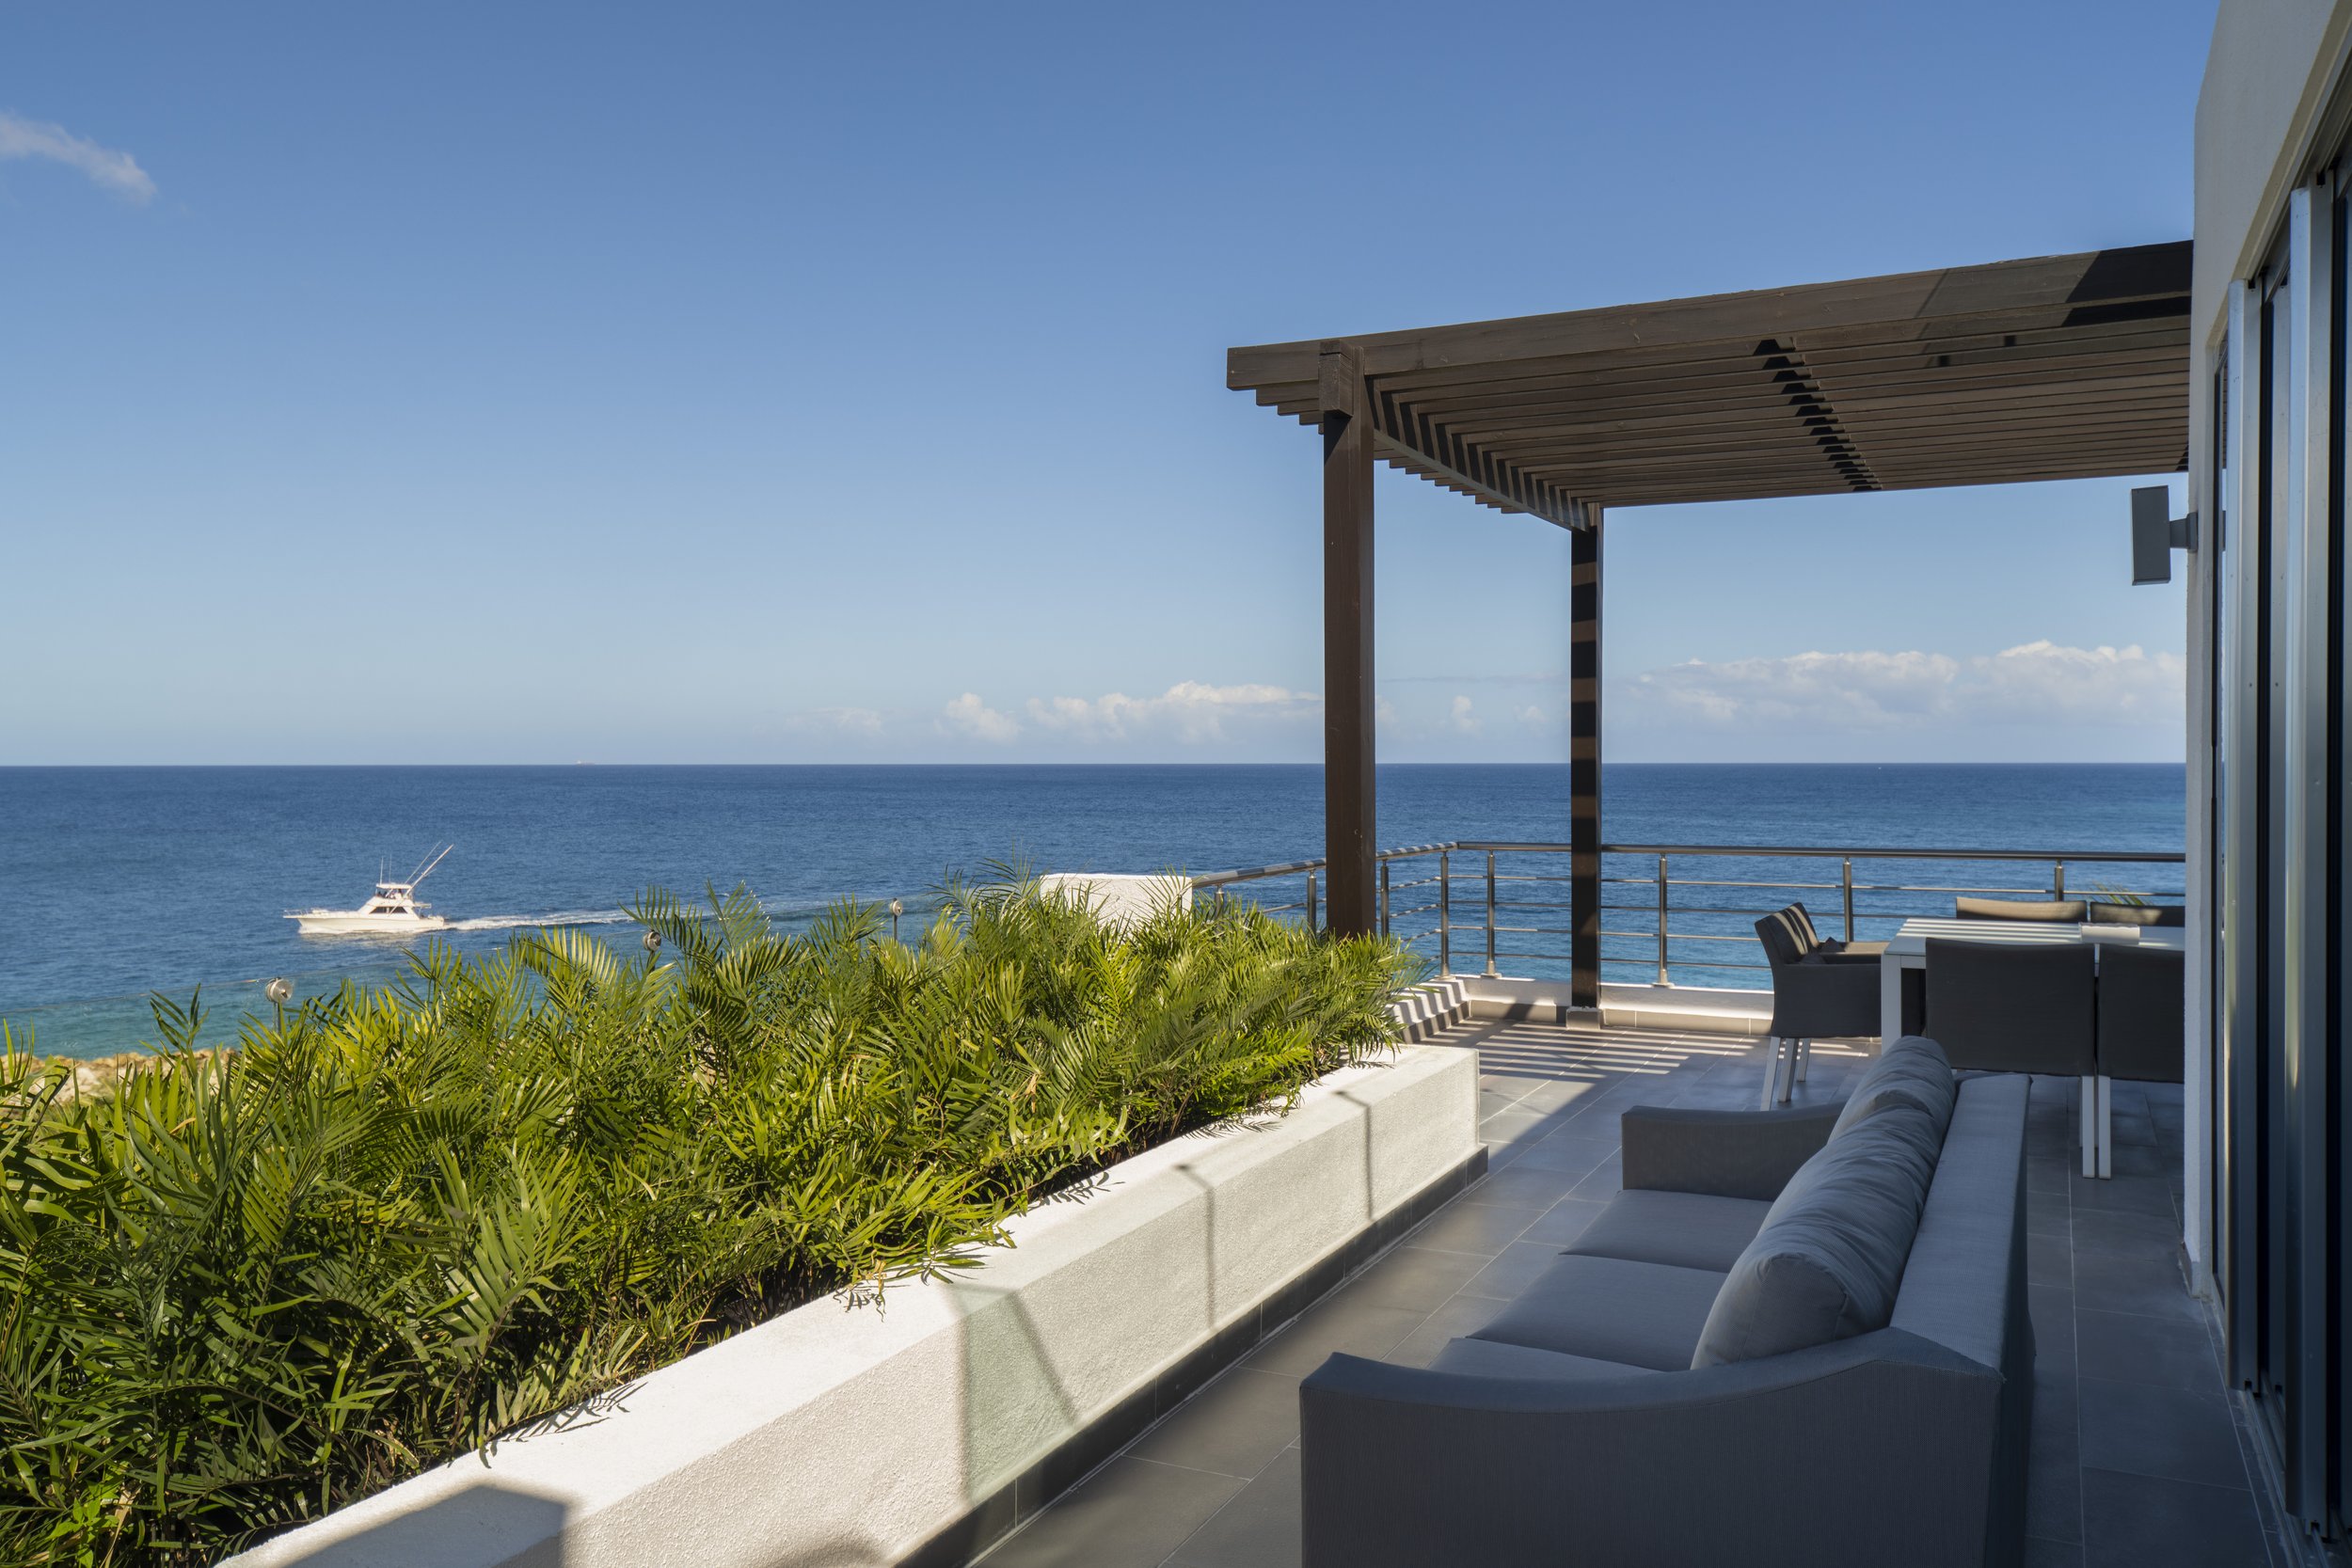 penthouse terrace of the ocean club costa norte by marriott in the dominican republic.jpg